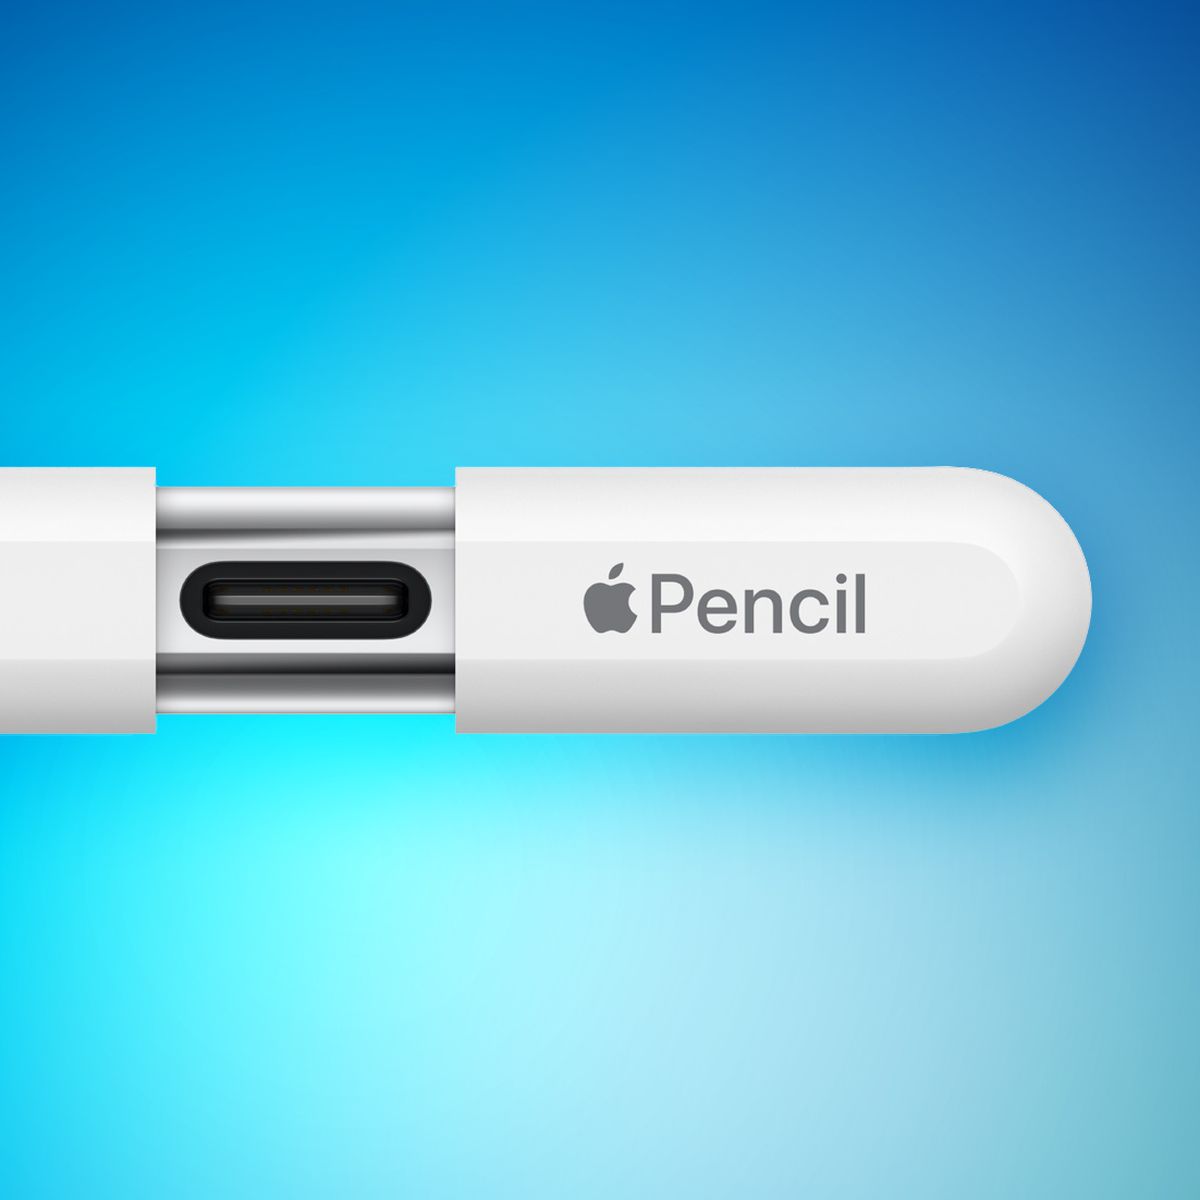 New Apple Pencil Announced With Hidden USB-C Port and More for $79